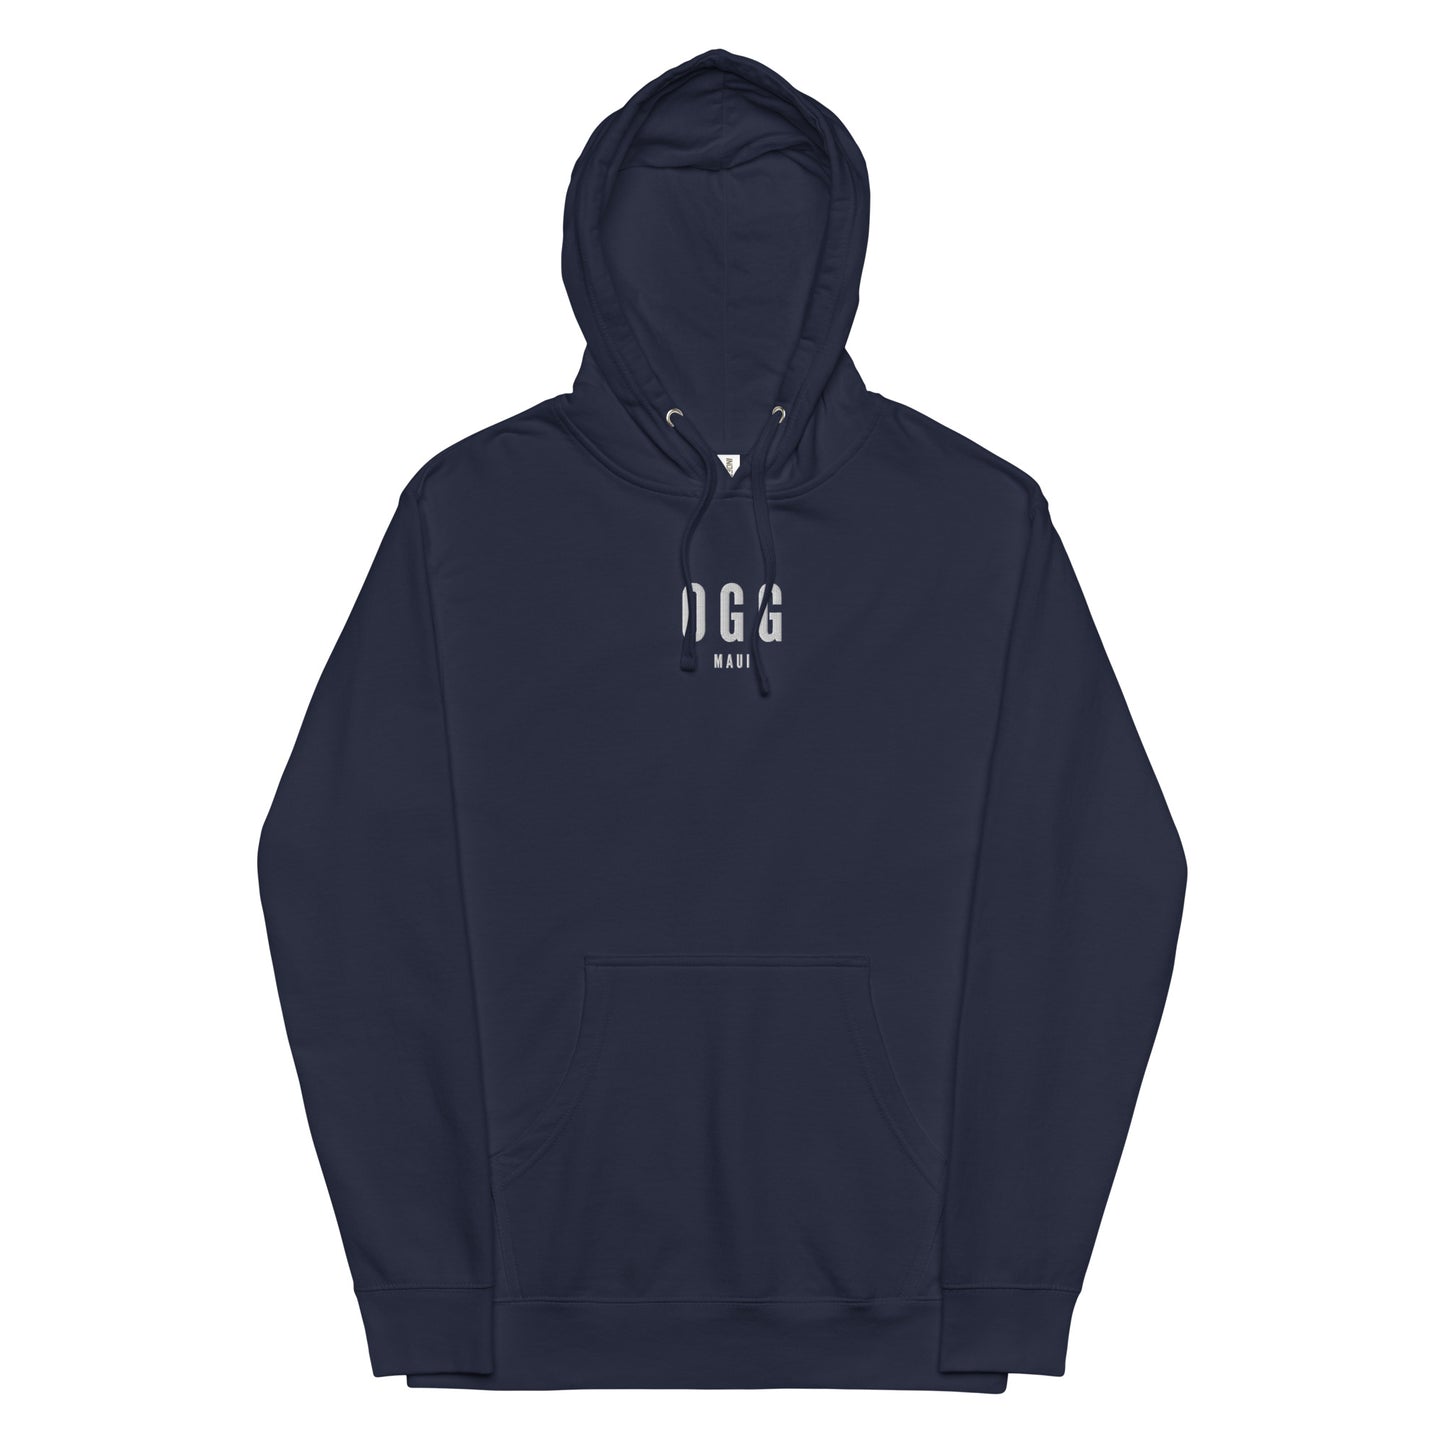 City Midweight Hoodie - White • OGG Maui • YHM Designs - Image 11